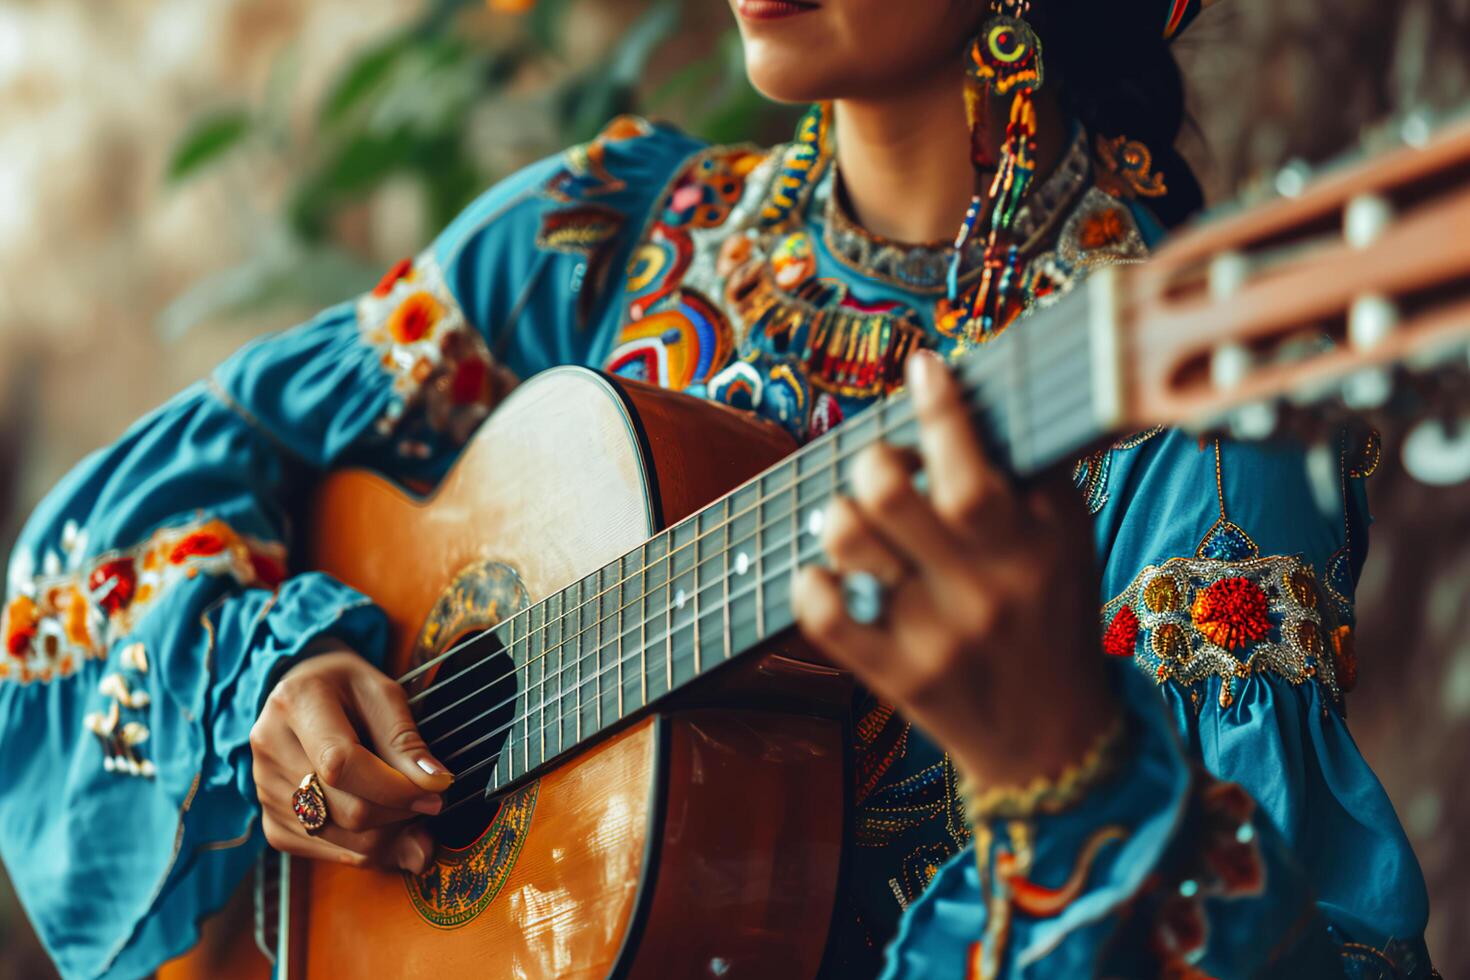 AI generated Folk-Inspired Radiance Embracing Mexican Beauty Traditions photo